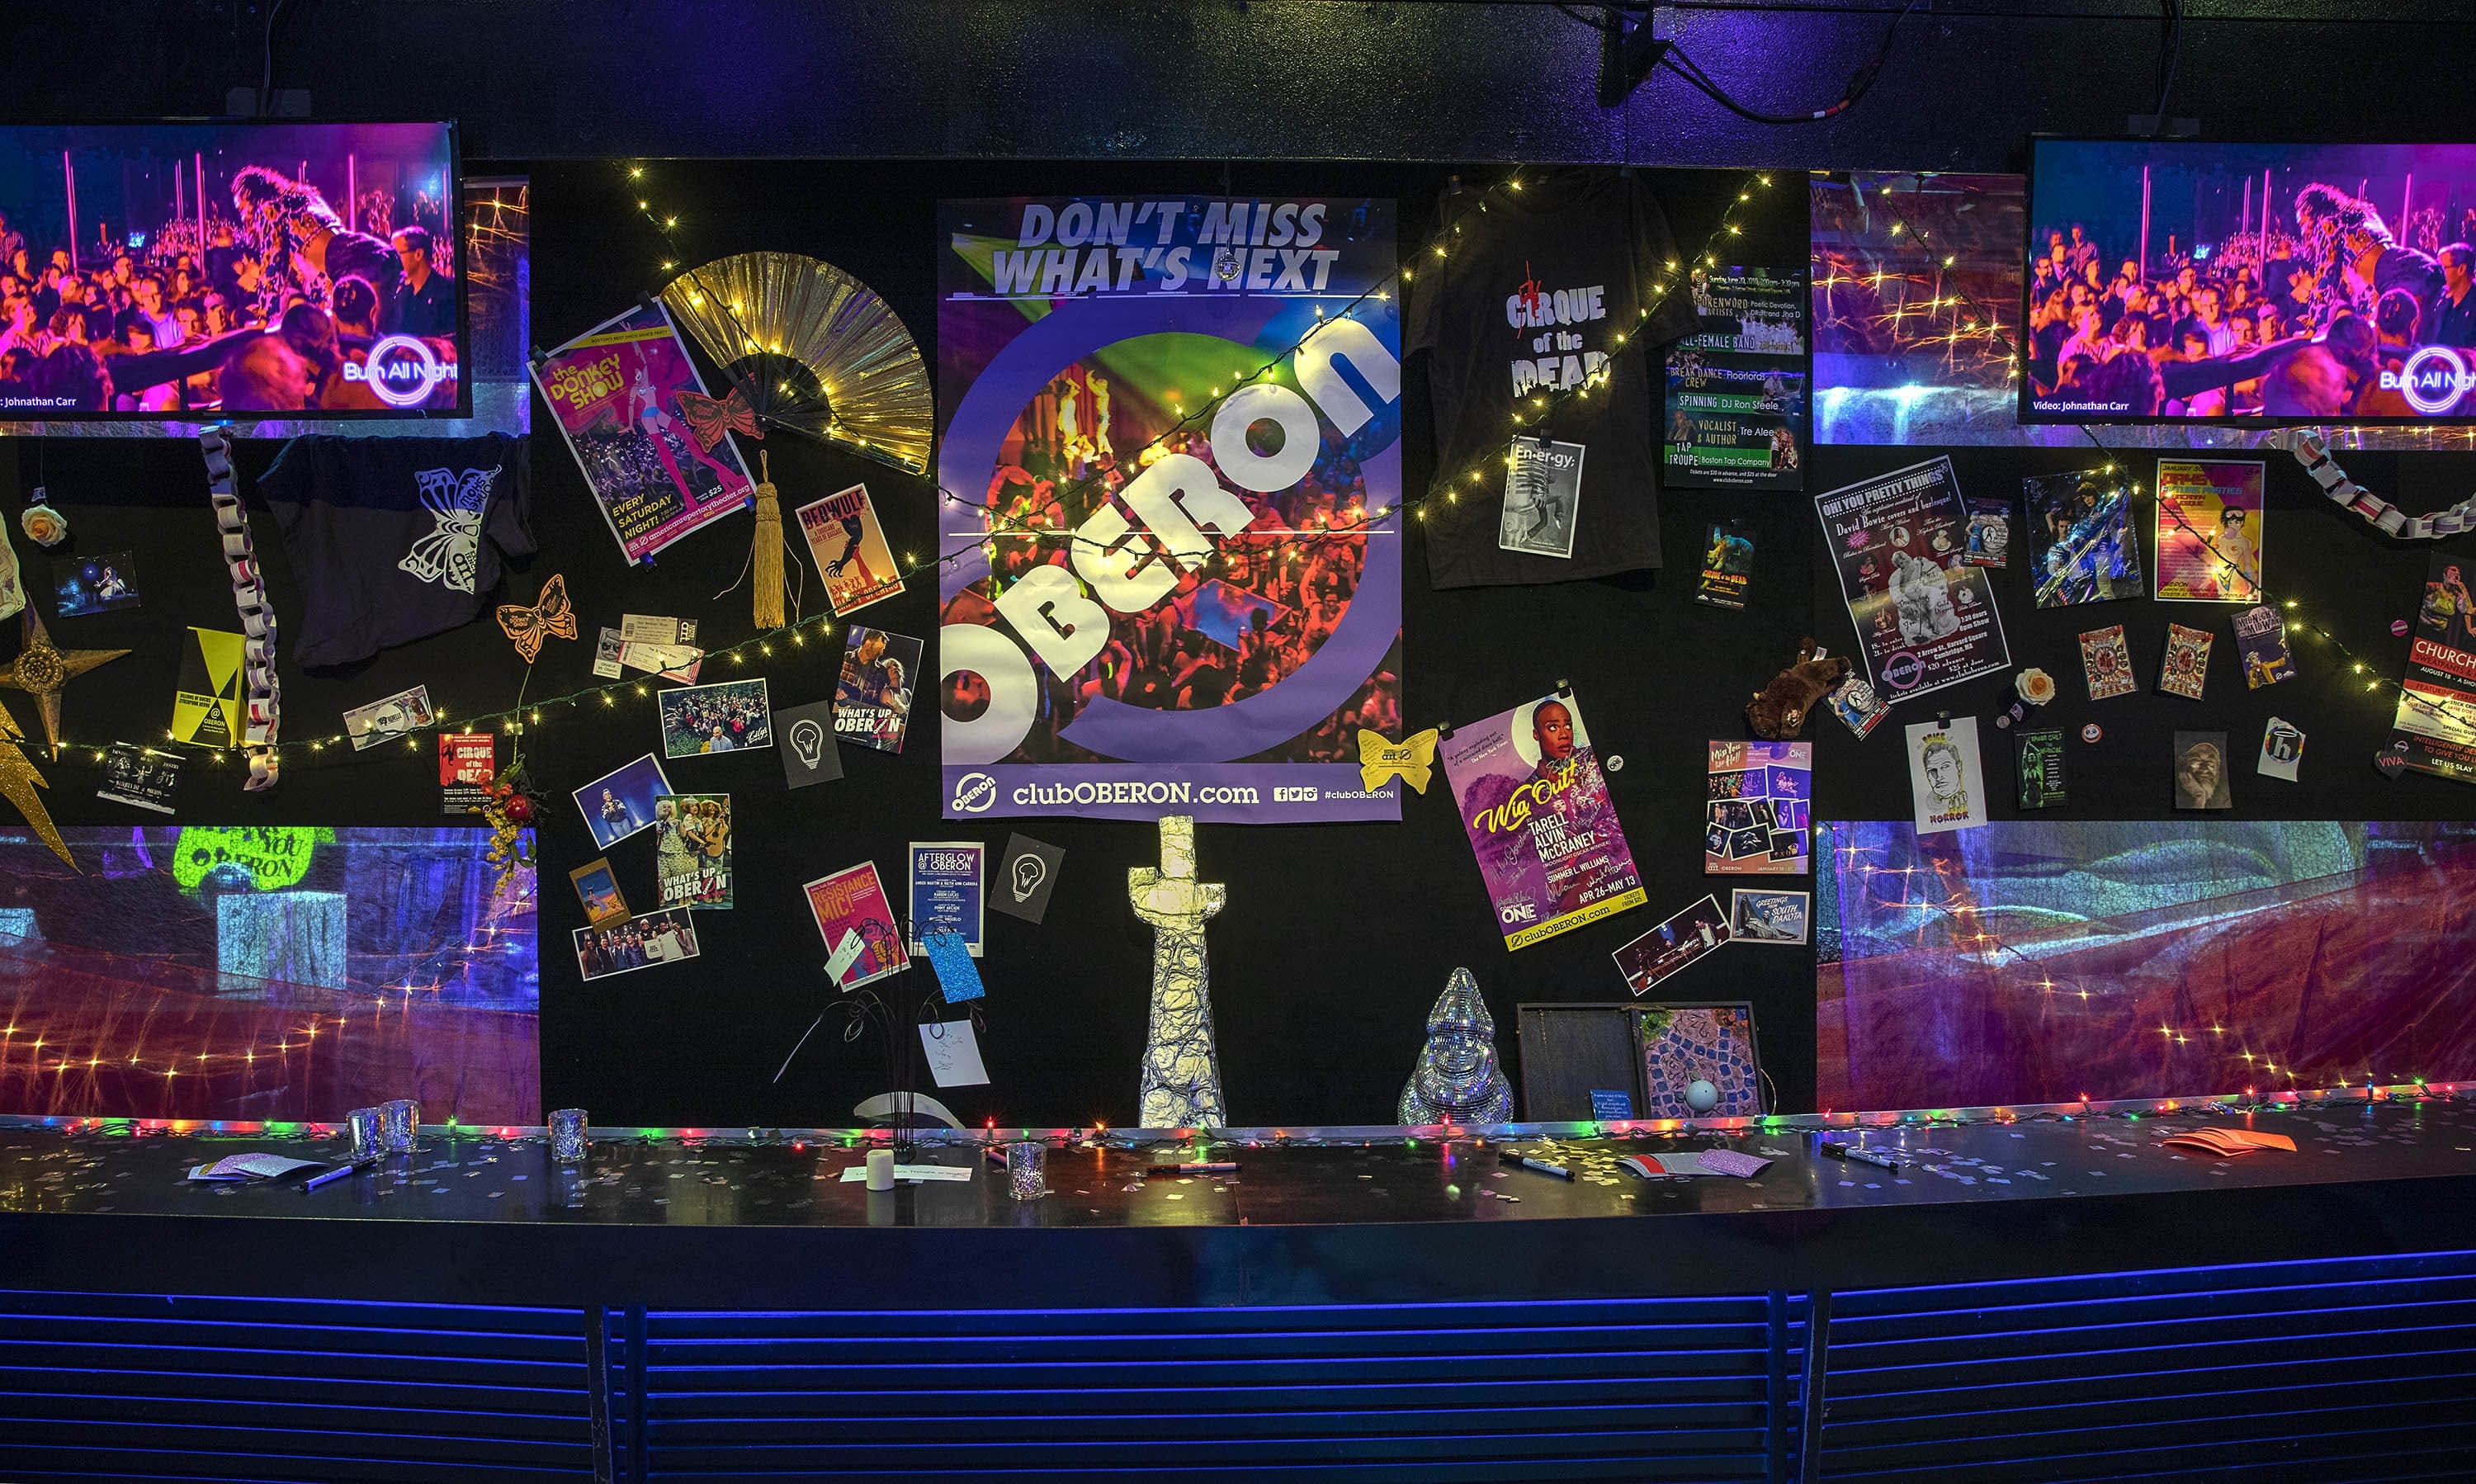 The shrine behind the bar of OBERON, composed of mementos of performances gathered over the years. (Robin Lubbock/WBUR)